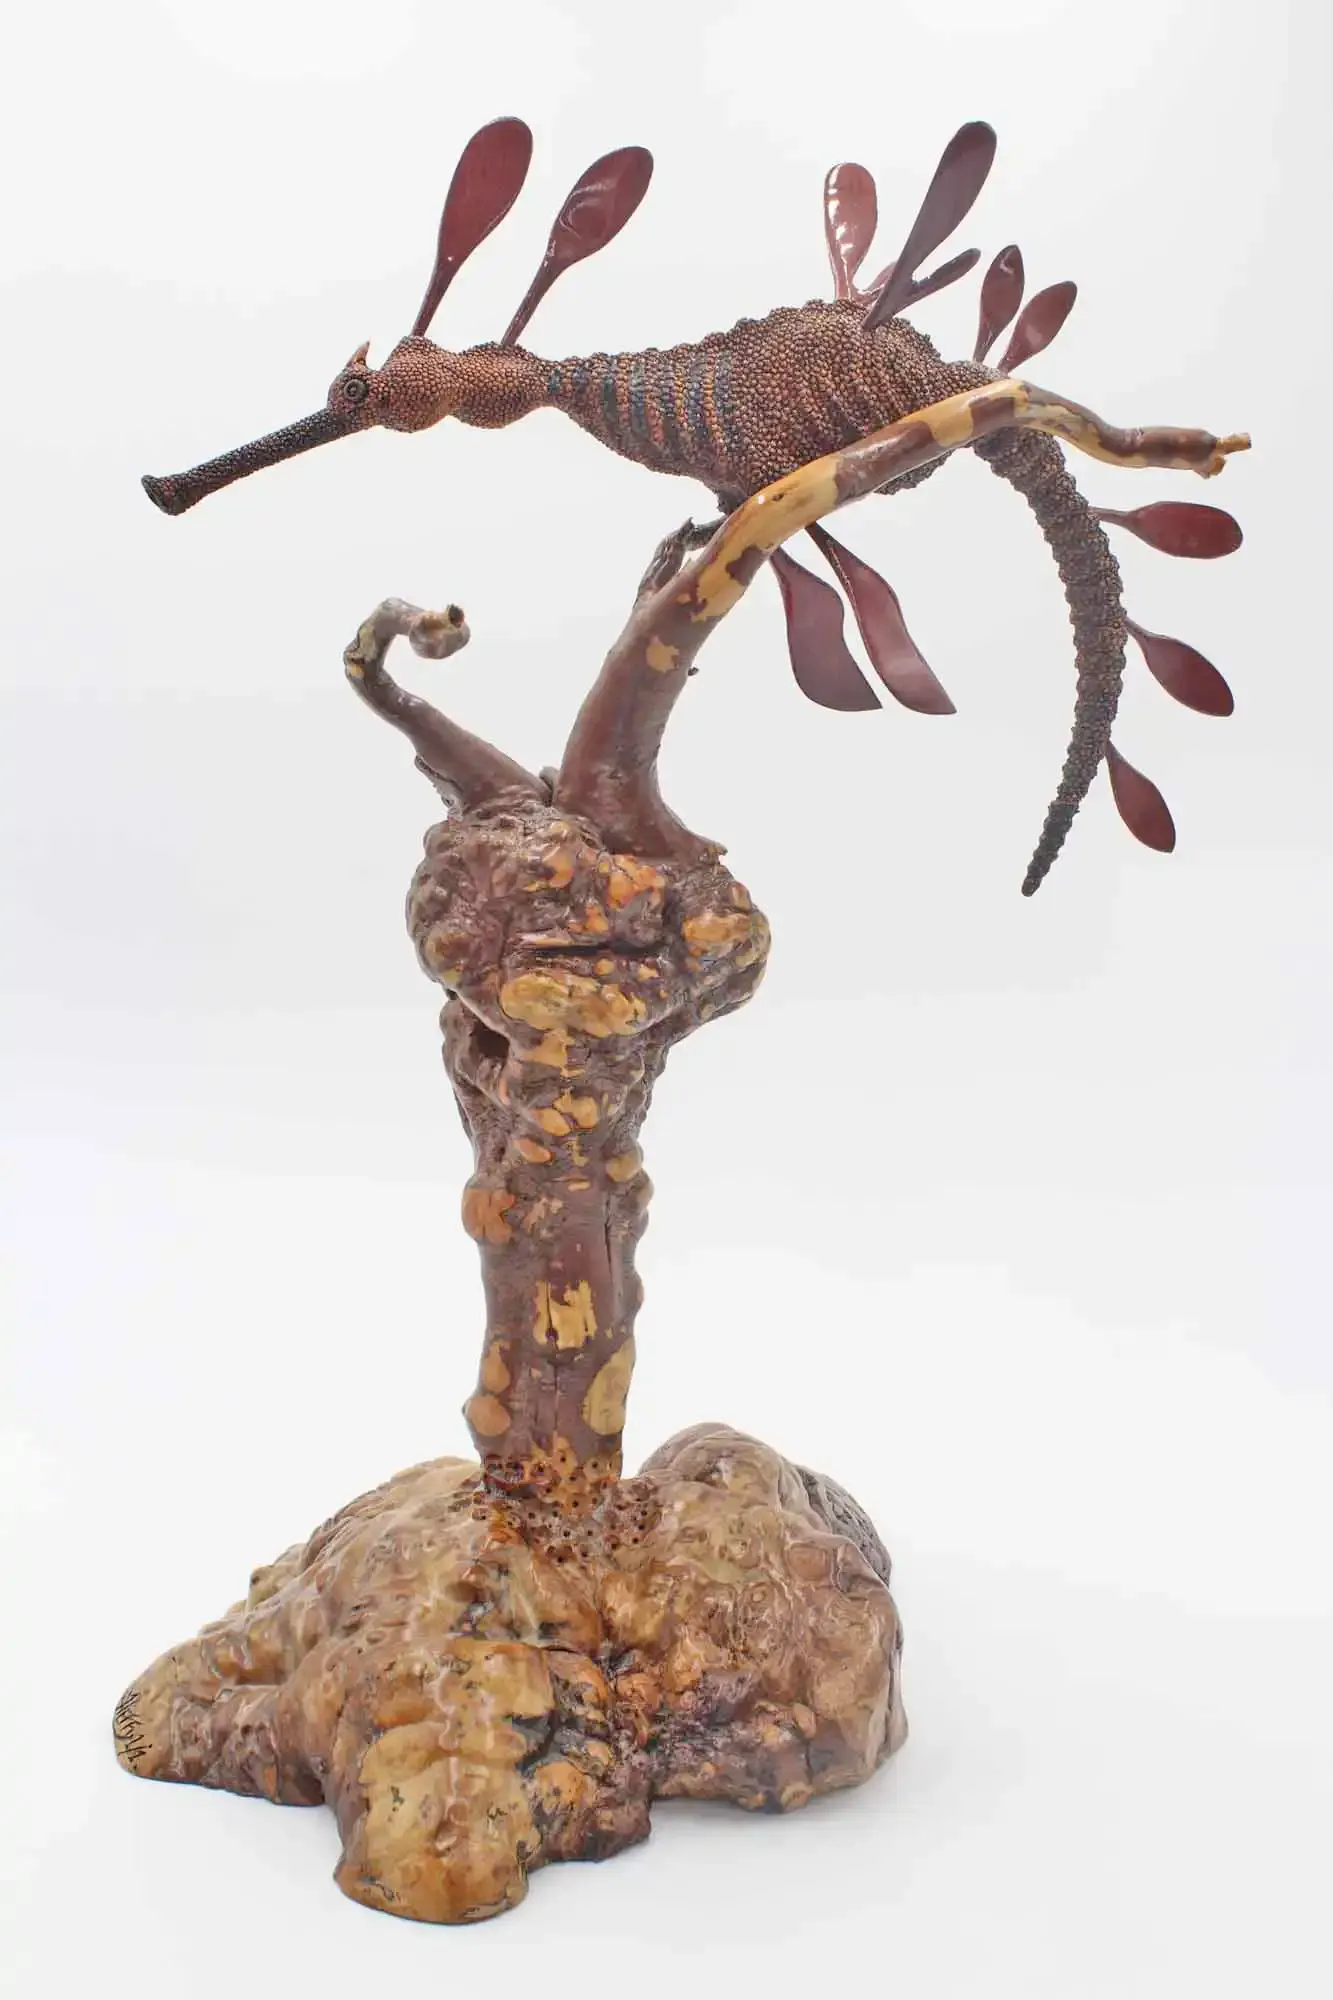 Weedy Sea Dragon woodcarving sculpture